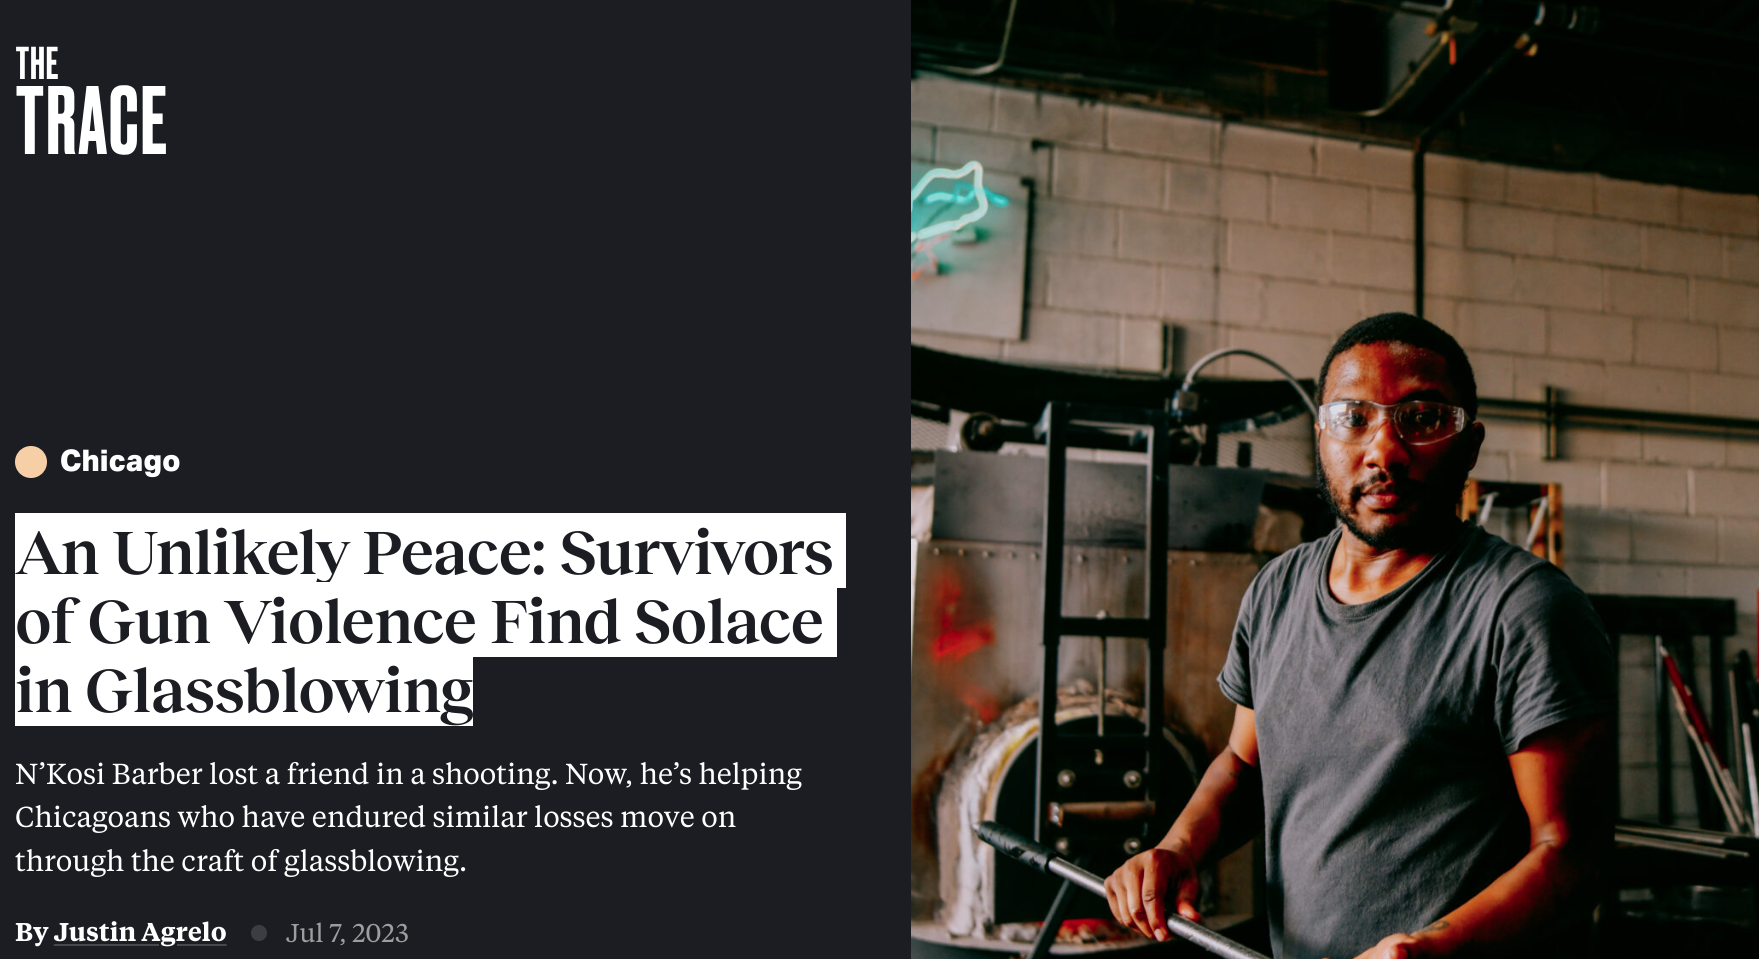 An Unlikely Peace: Survivors of Gun Violence Find Solace in Glassblowing